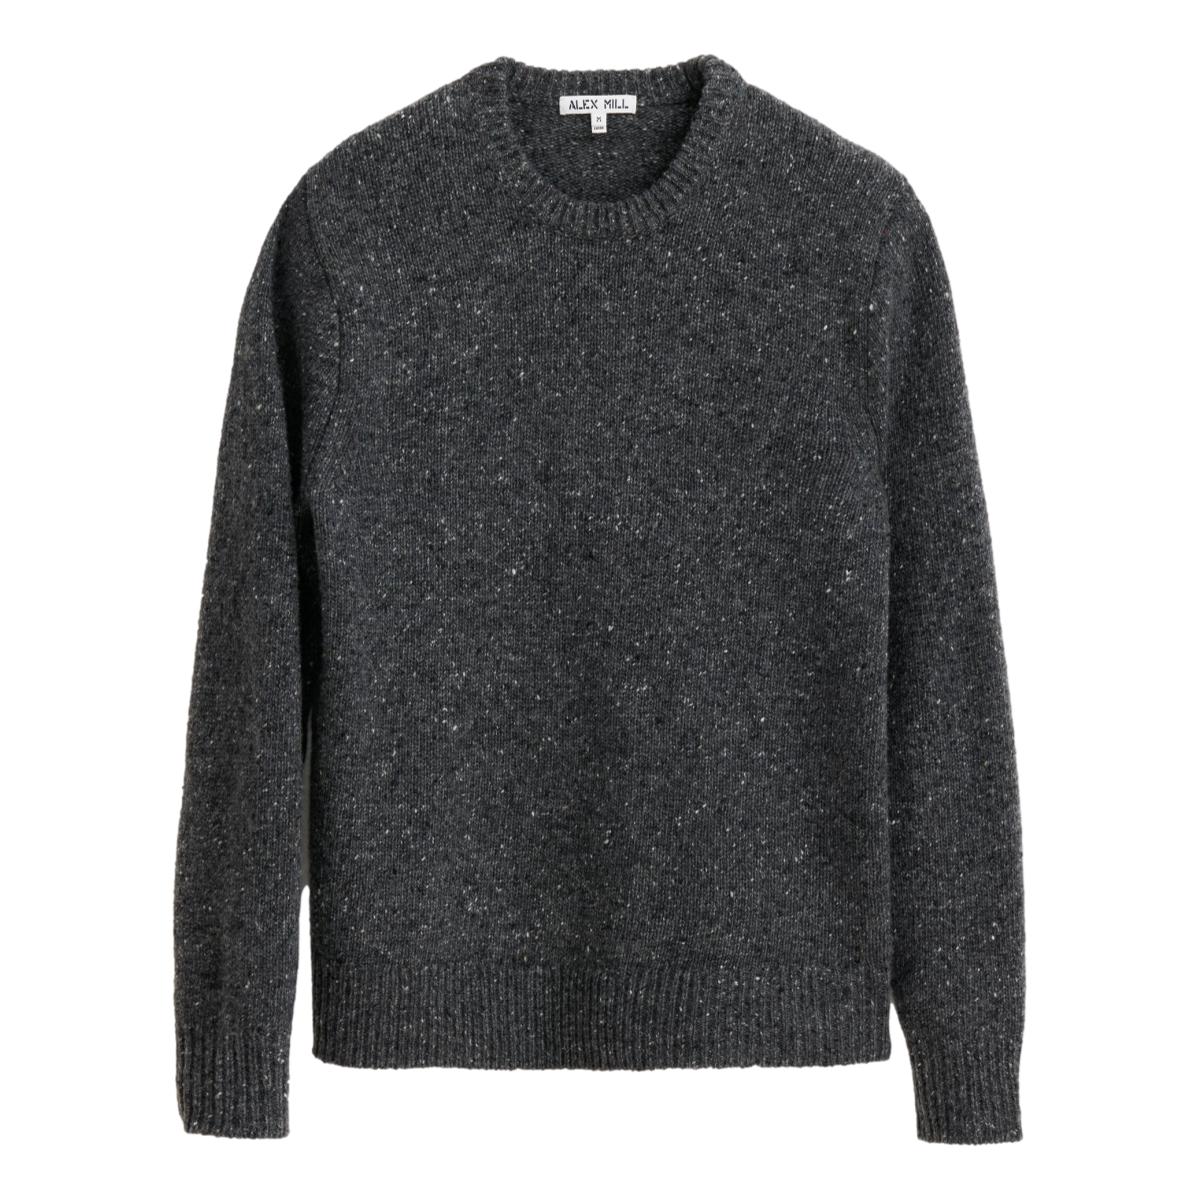 Donegal Crew Neck Sweater Charcoal - Sweater